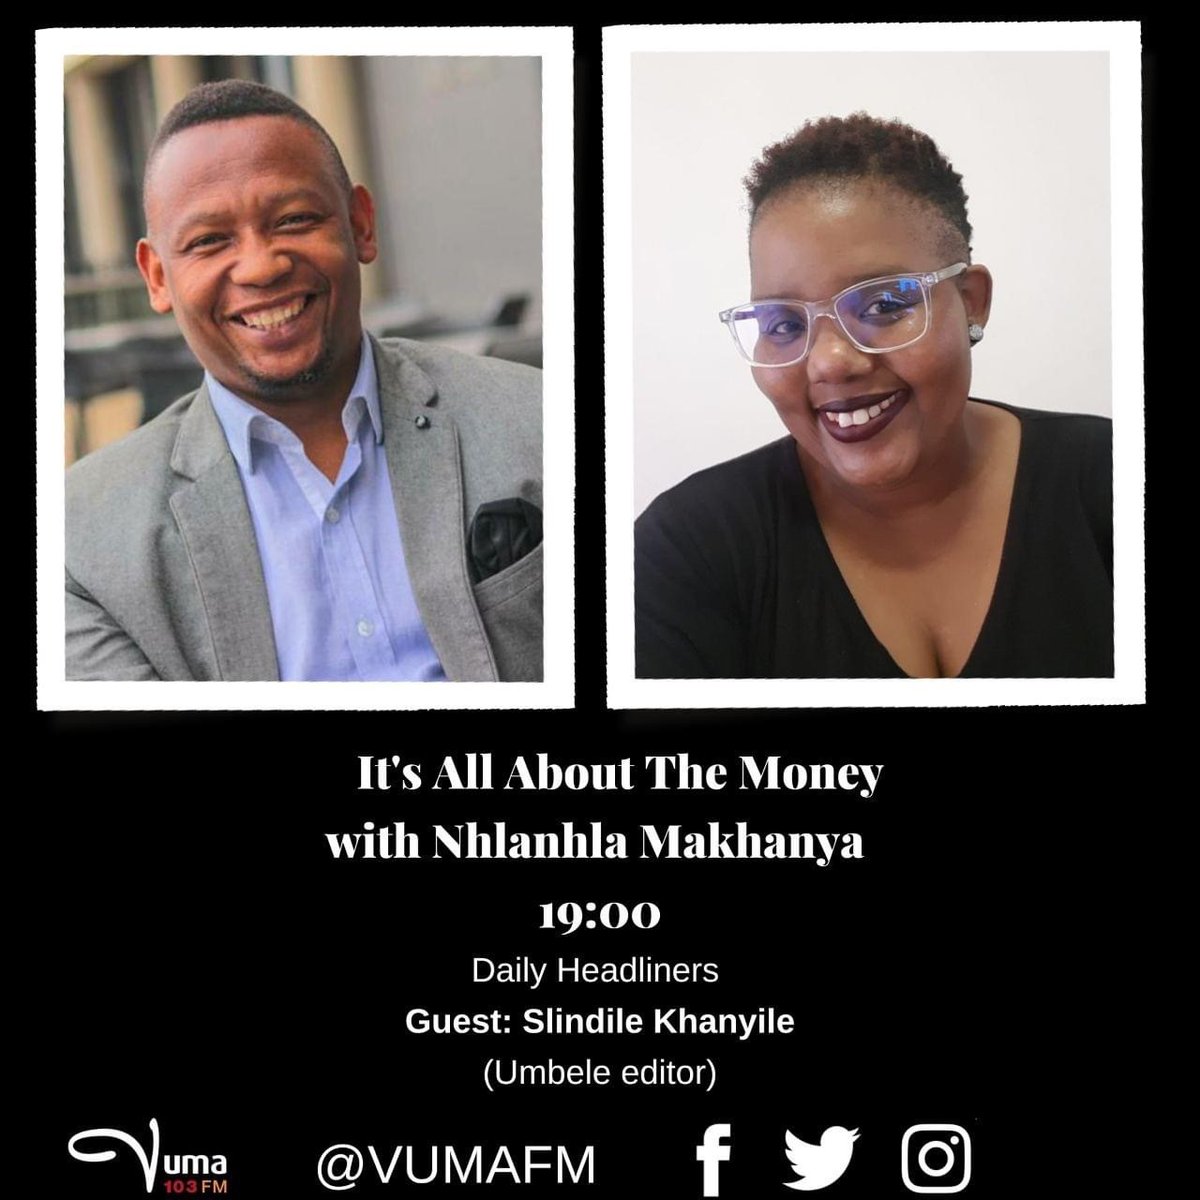 #ItsAllAboutTheMoney with @NhlanhlaMak Produced by @Zowakha From 19:00-20h00 Subject: #DailyHeadliners and Financial Wellness #FinancialLiteracyMonth ON AIR: We will be joined by @likhanyiletm and @BidvestLife iframe.iono.fm/s/77 Studio:086 1010 300 VN:073 709 1991